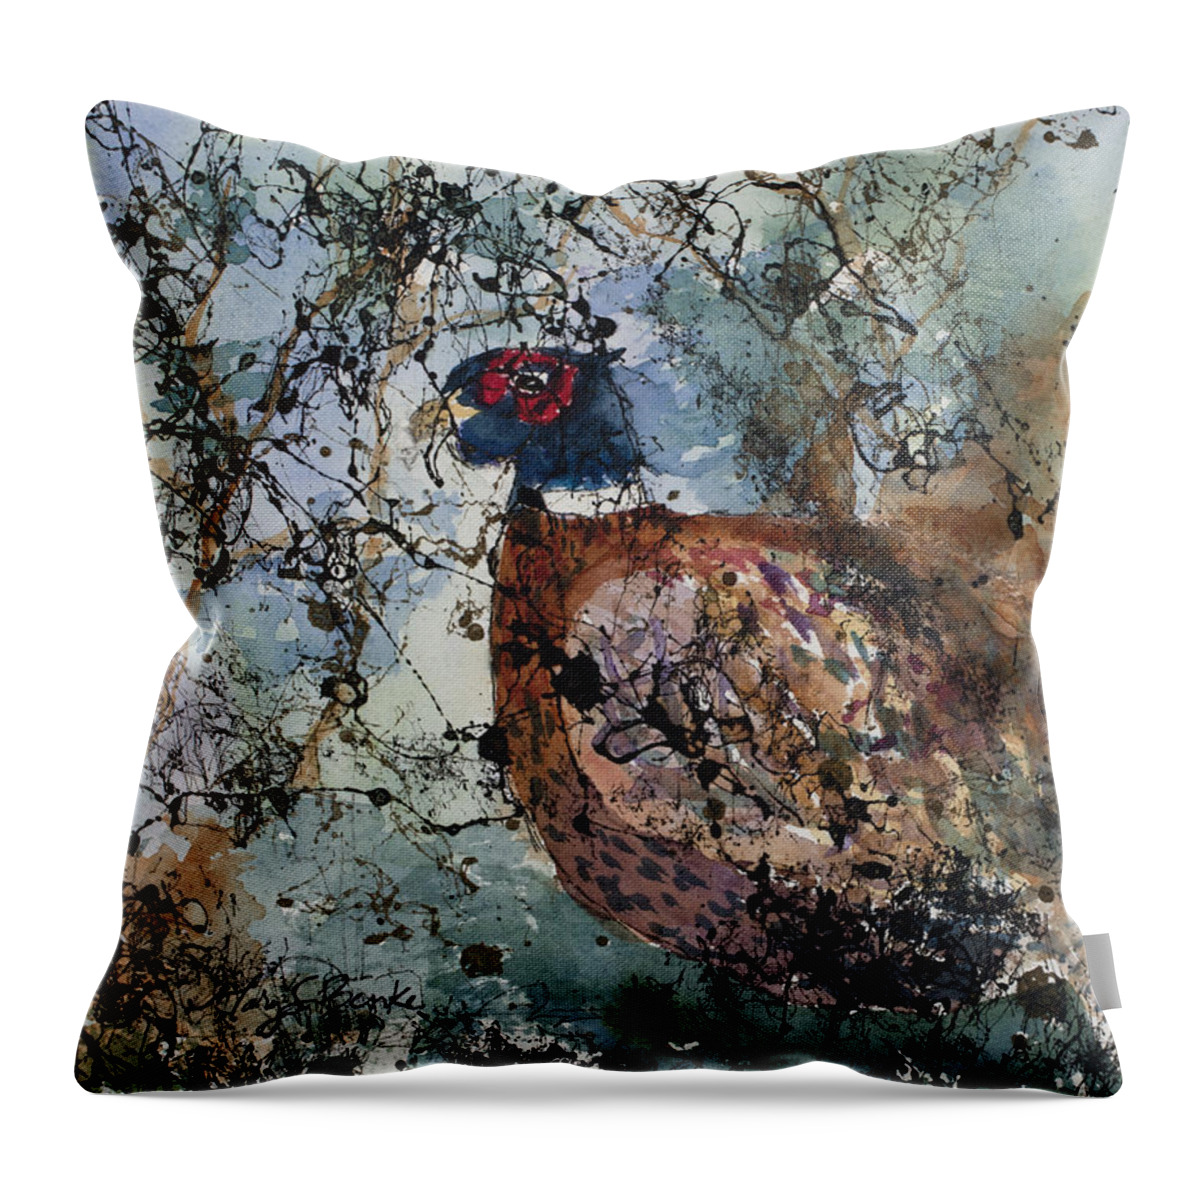 Pheasant Throw Pillow featuring the painting Hidden Gem by Mary Benke